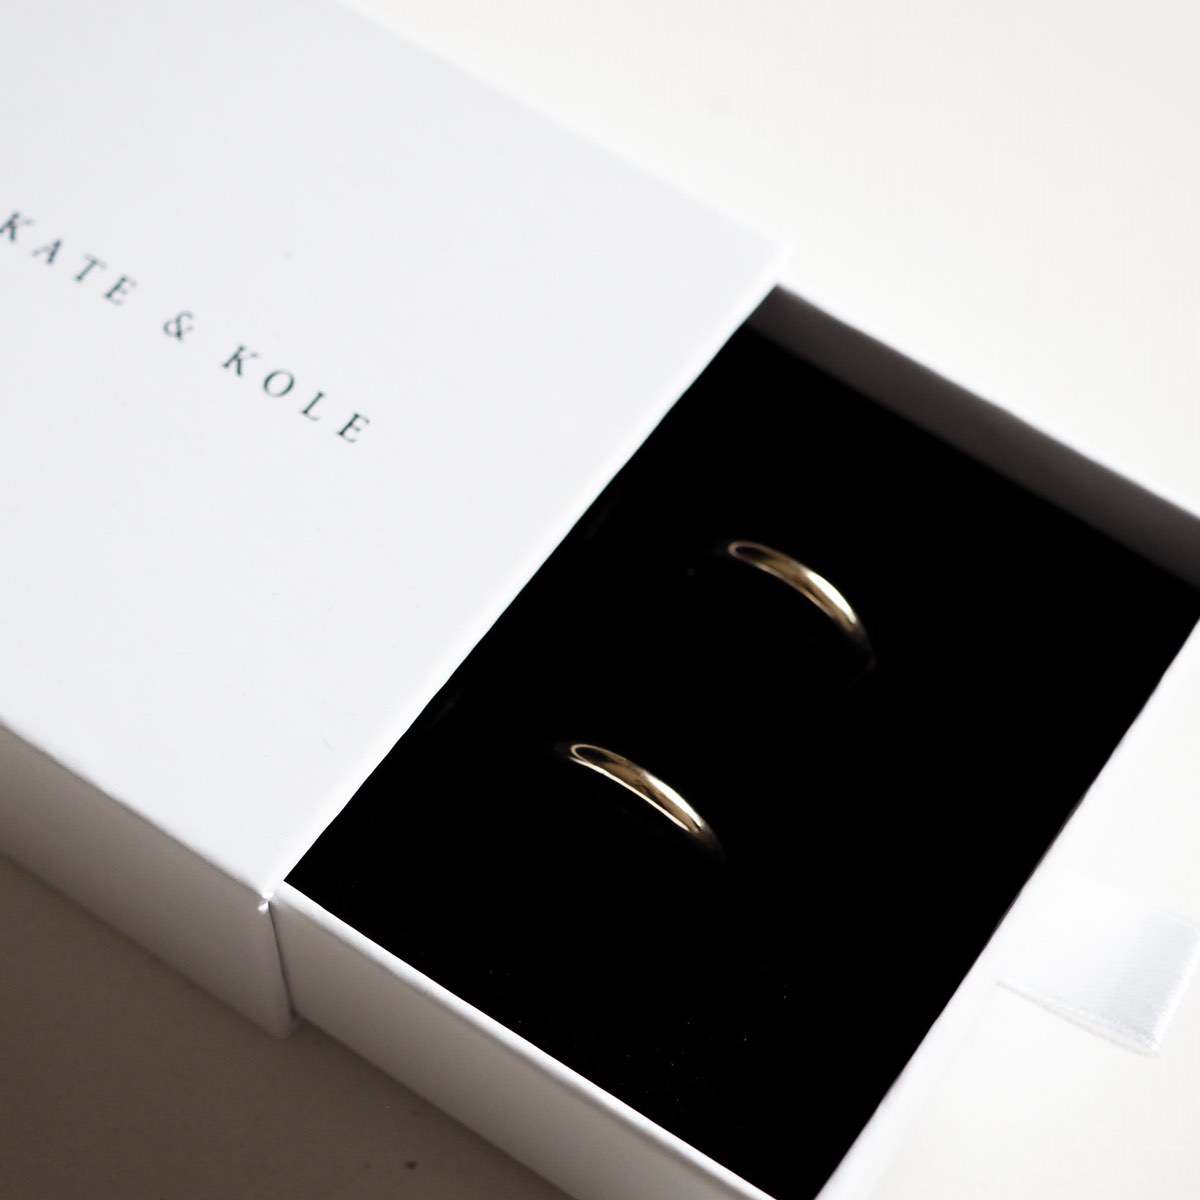 Our solid 9ct yellow gold small round huggies sitting perfectly in our Kate & Kole jewellery box